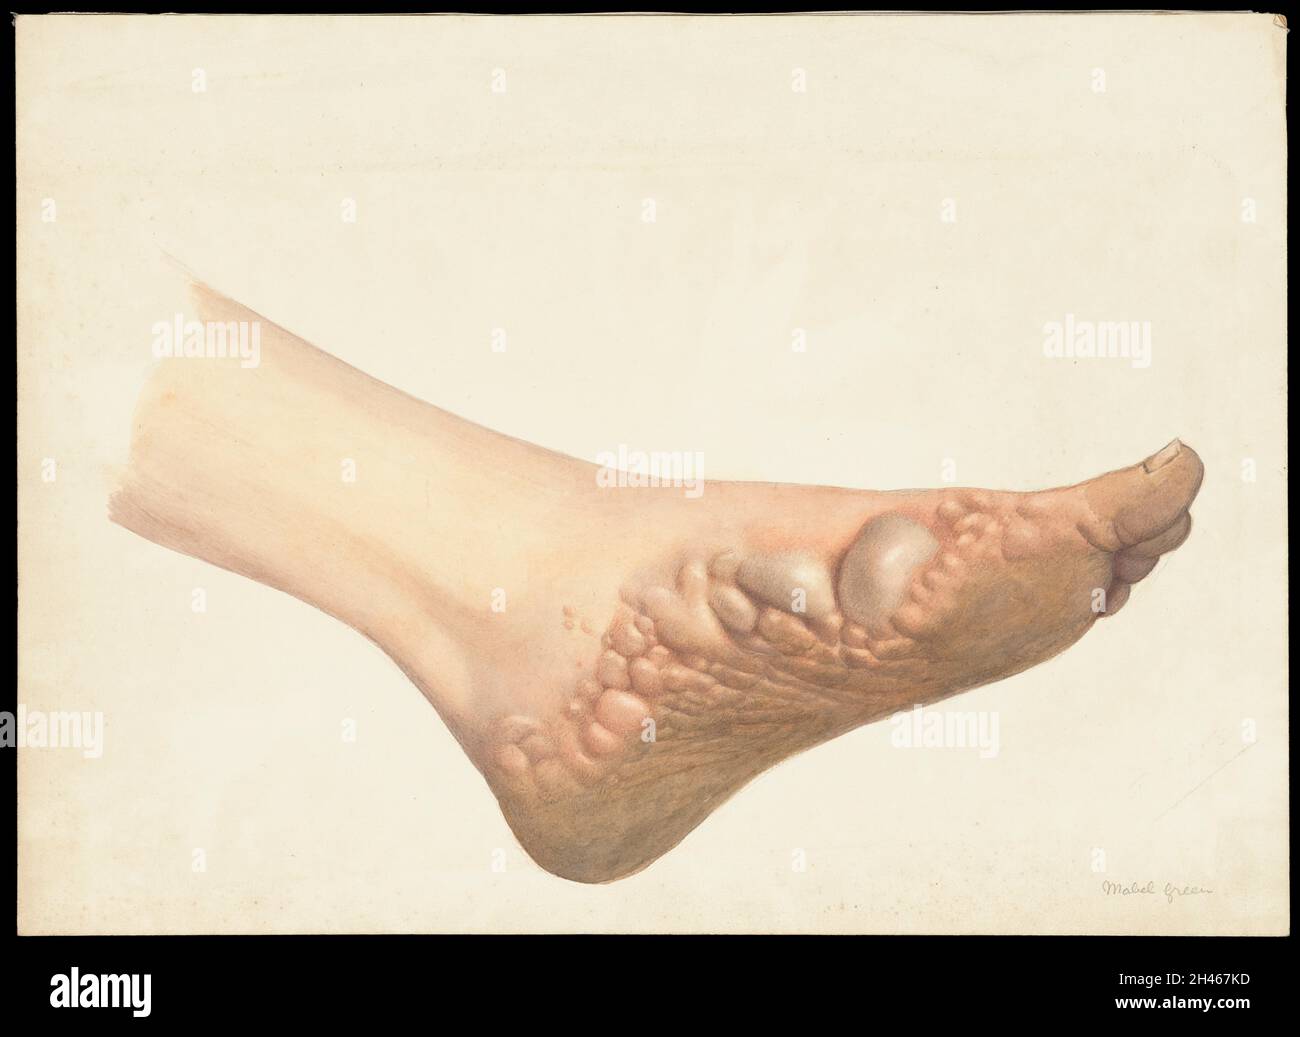 A foot with disease designated as pompholyx (also known as eczema). Watercolour by Mabel Green, 1906. Stock Photo